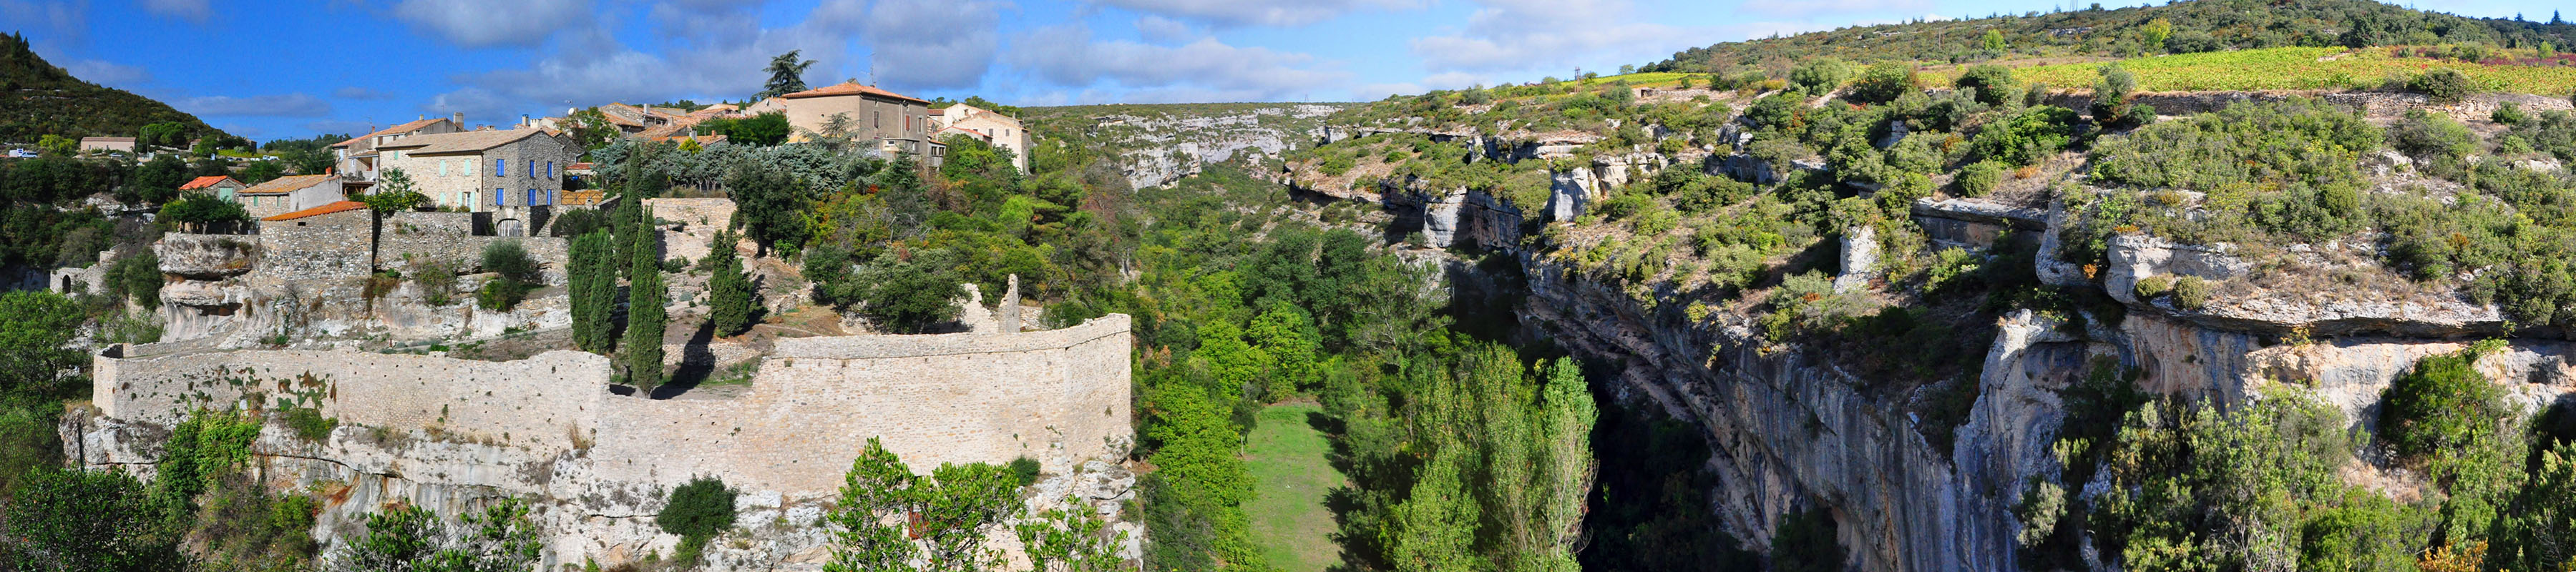 The village of Minerve panorama